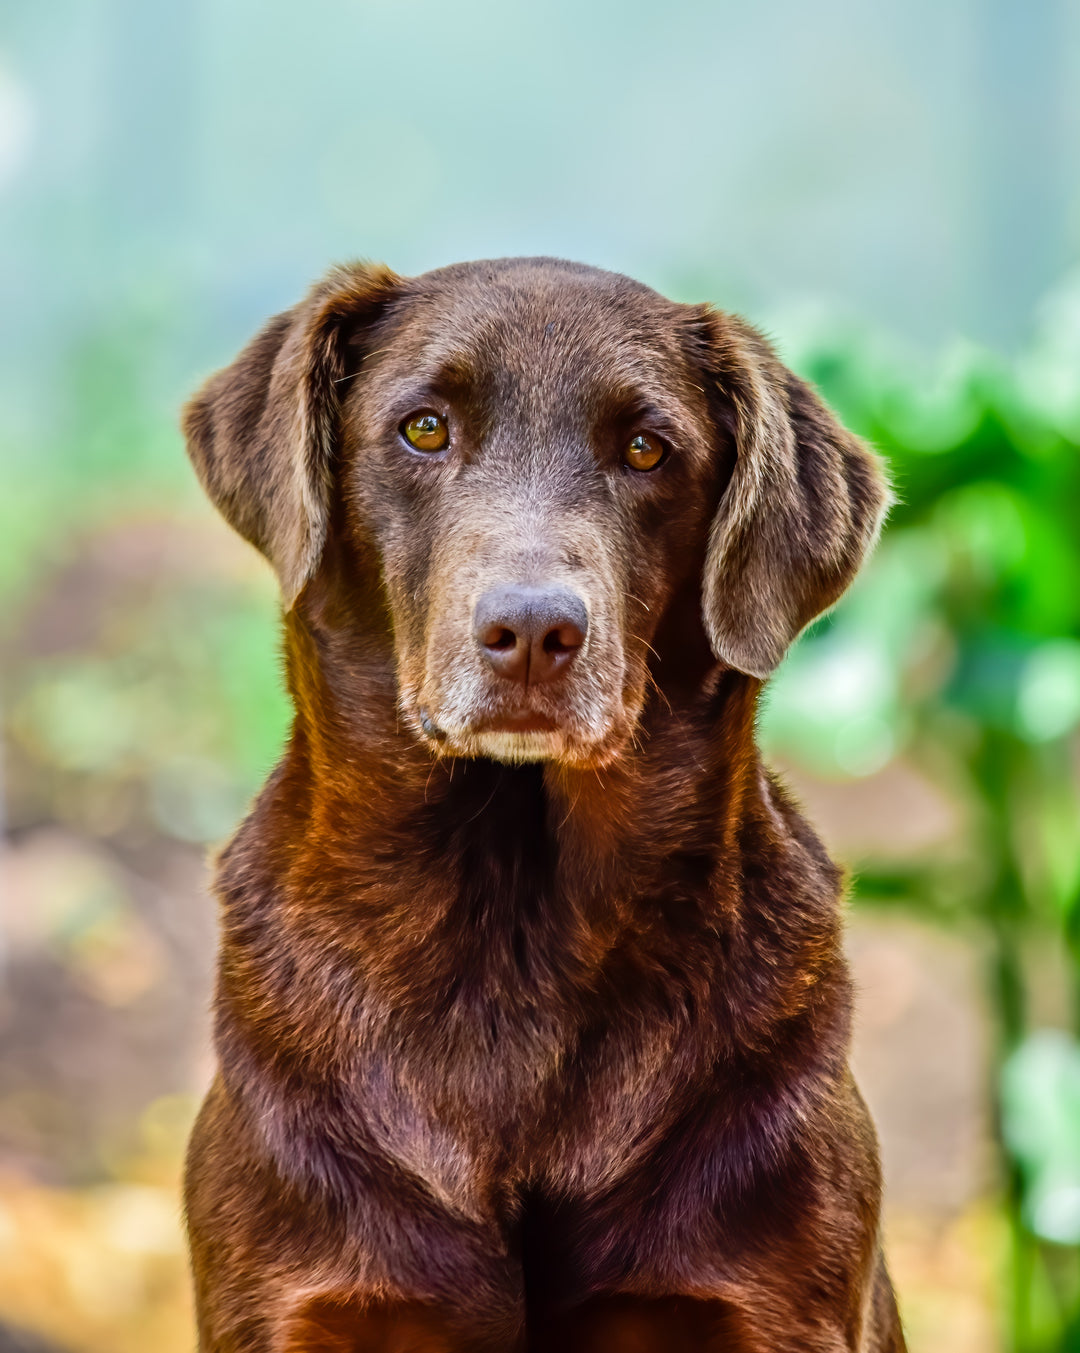 Aged to Perfection: Adopting an Older (Gently-Used) Dog